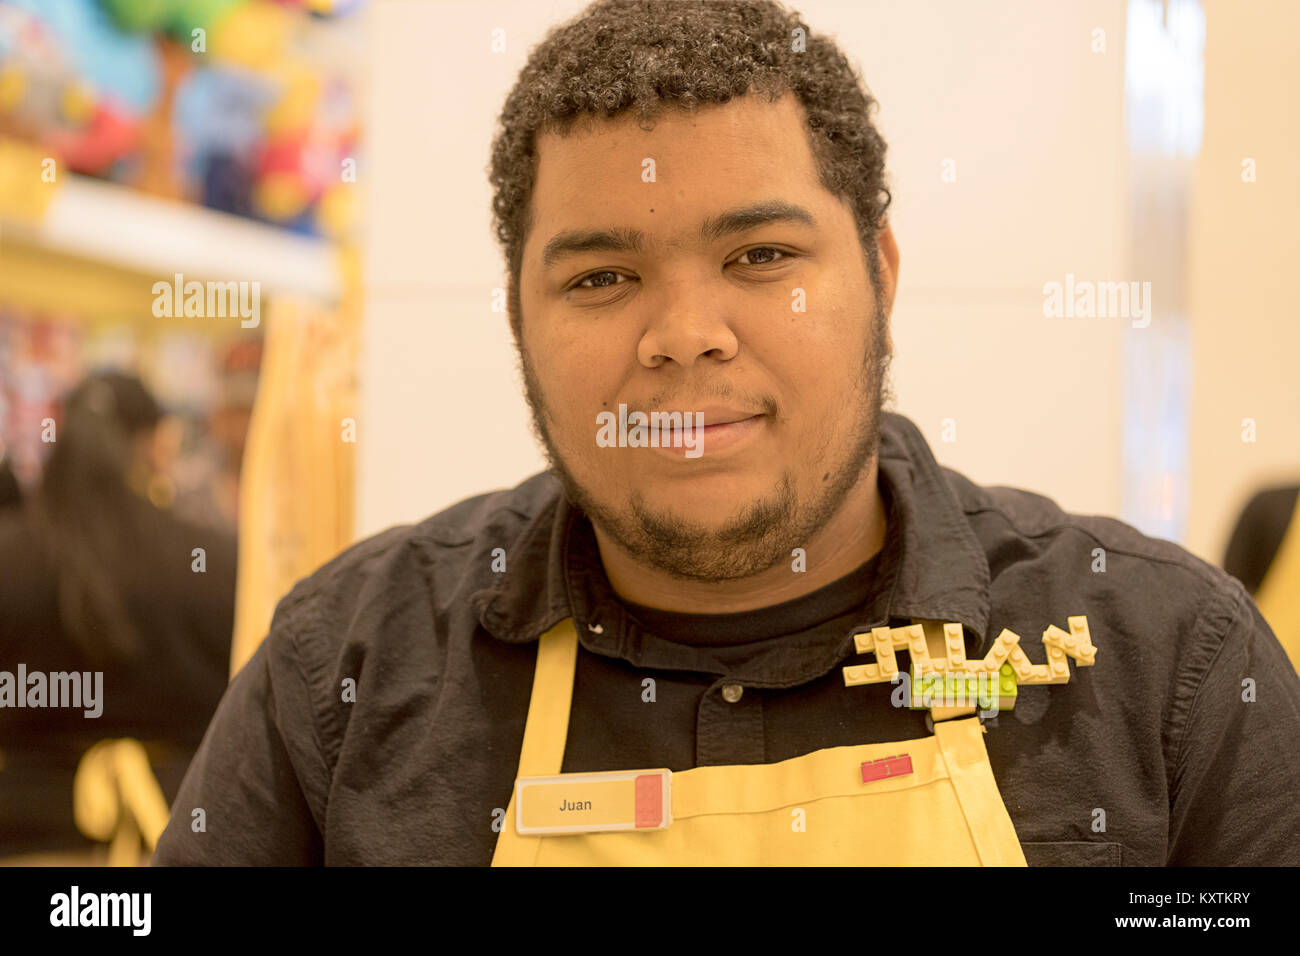 A clerk at the Lego store on FIfth Ave. in Manhattan, New York City. wearing a nametag made out of Legos. Stock Photo